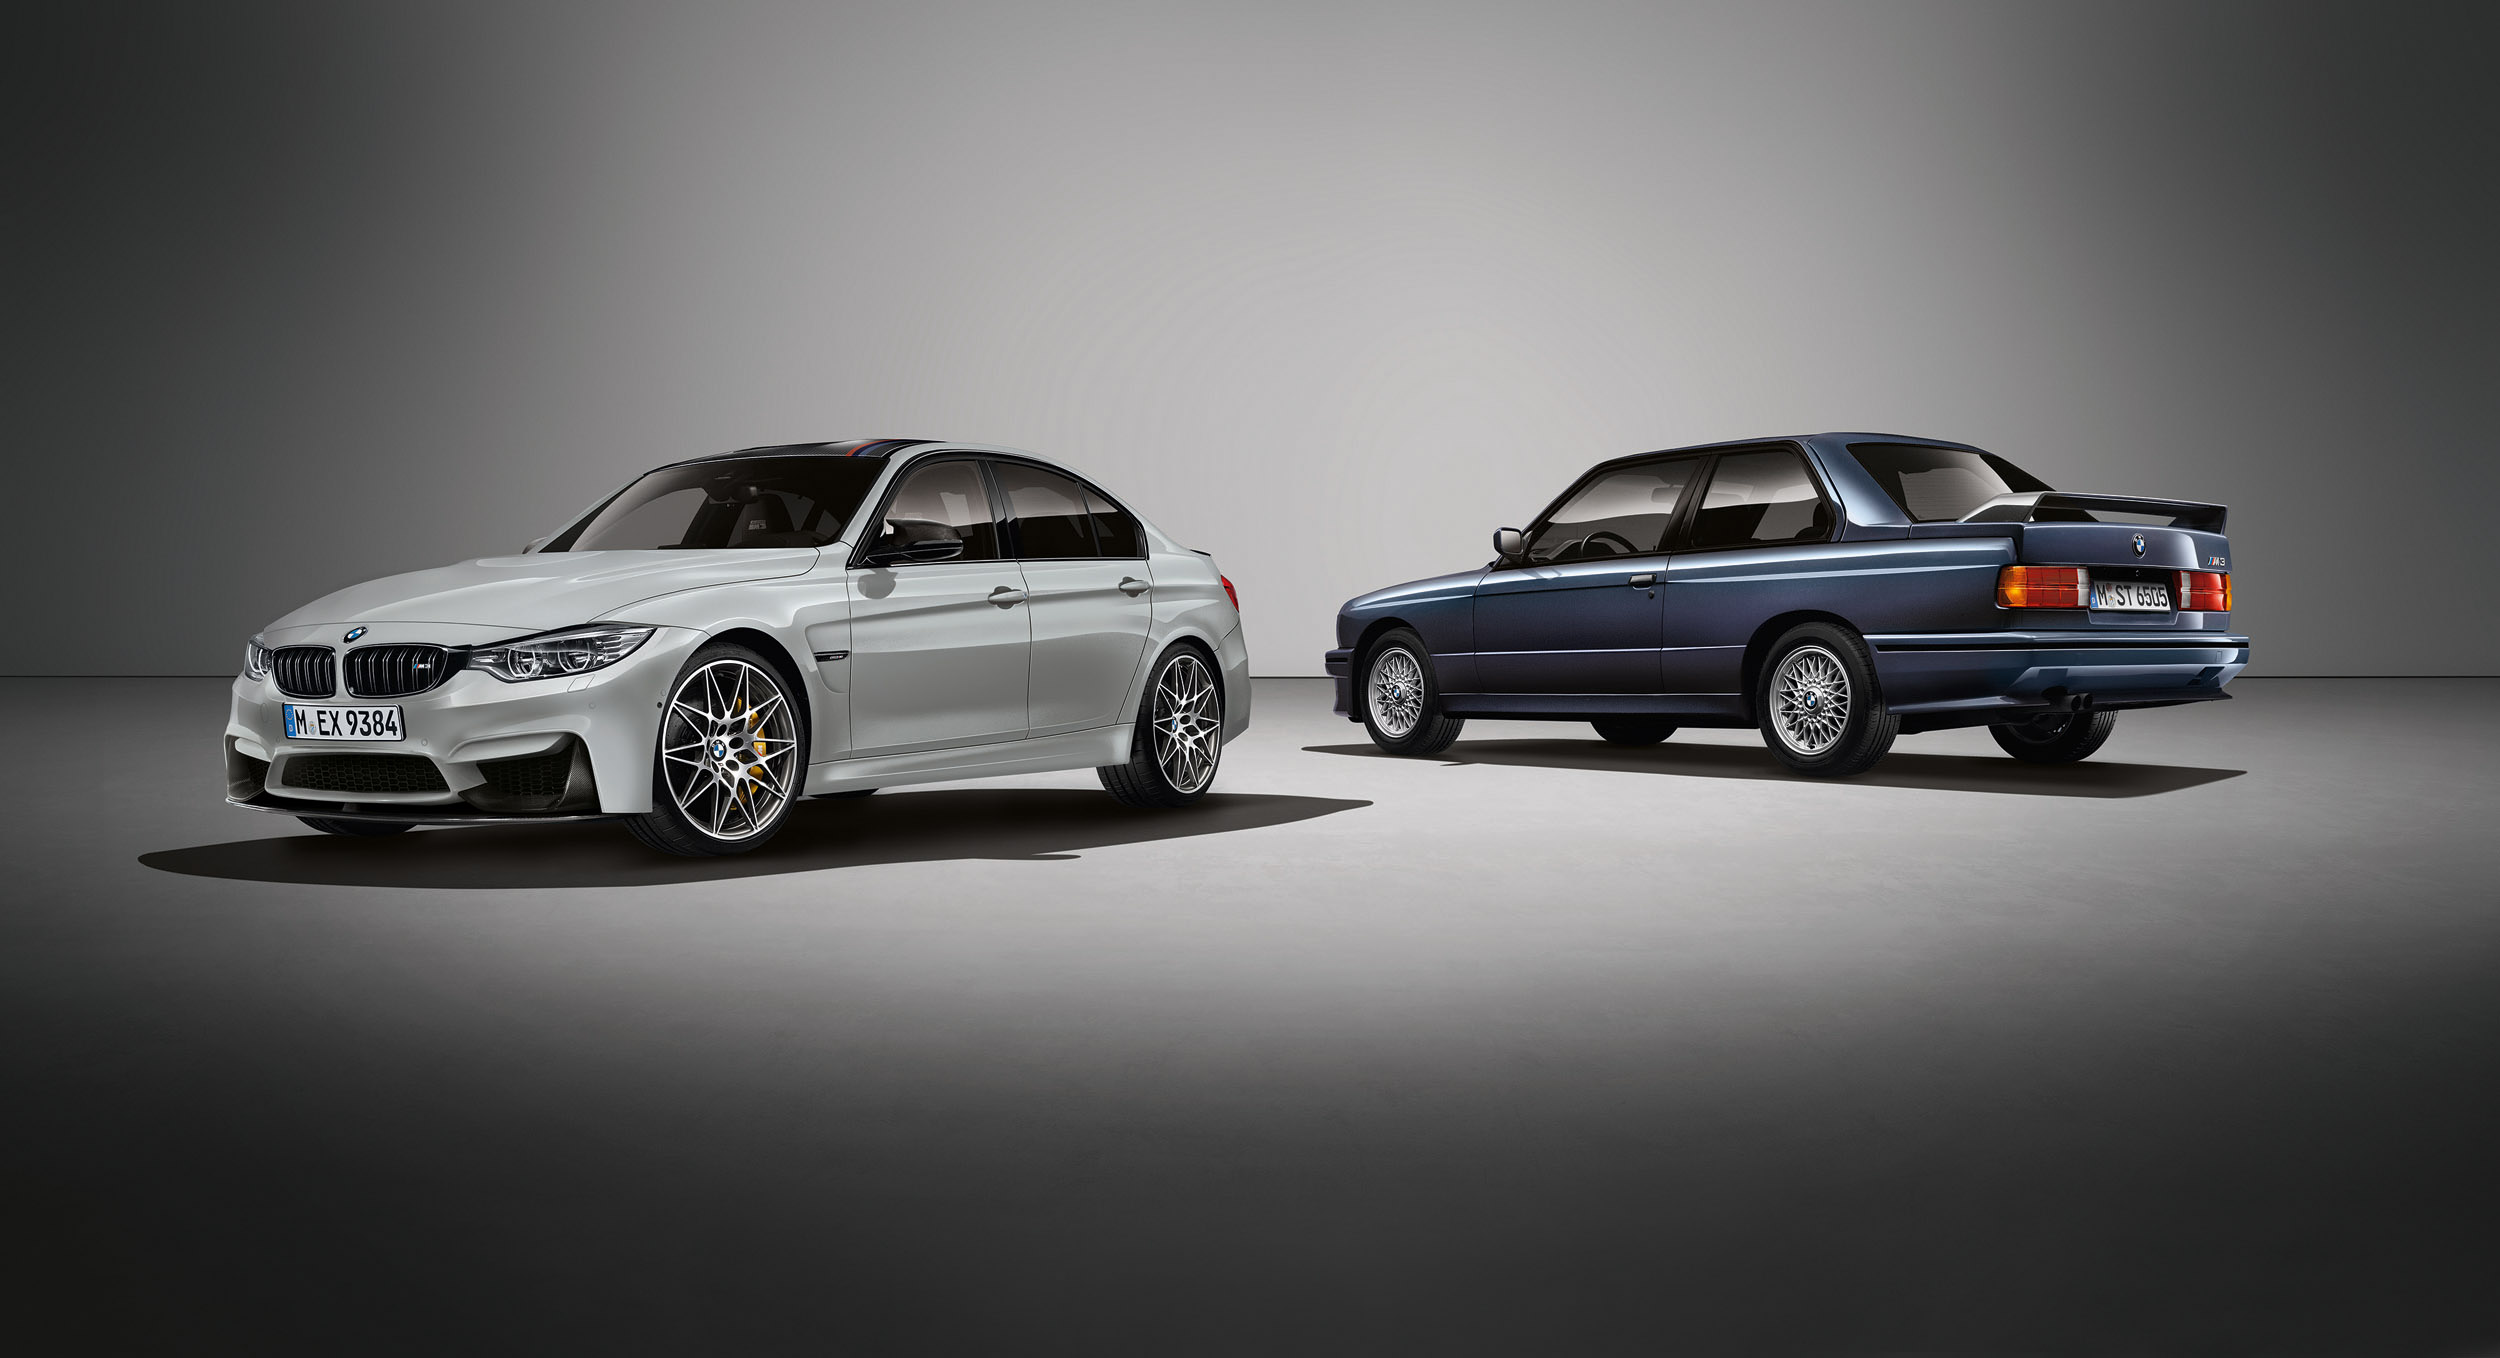 Bmw M3 30 Jahre Limited Edition Celebrates 30 Years Since The 0 M3 Evo